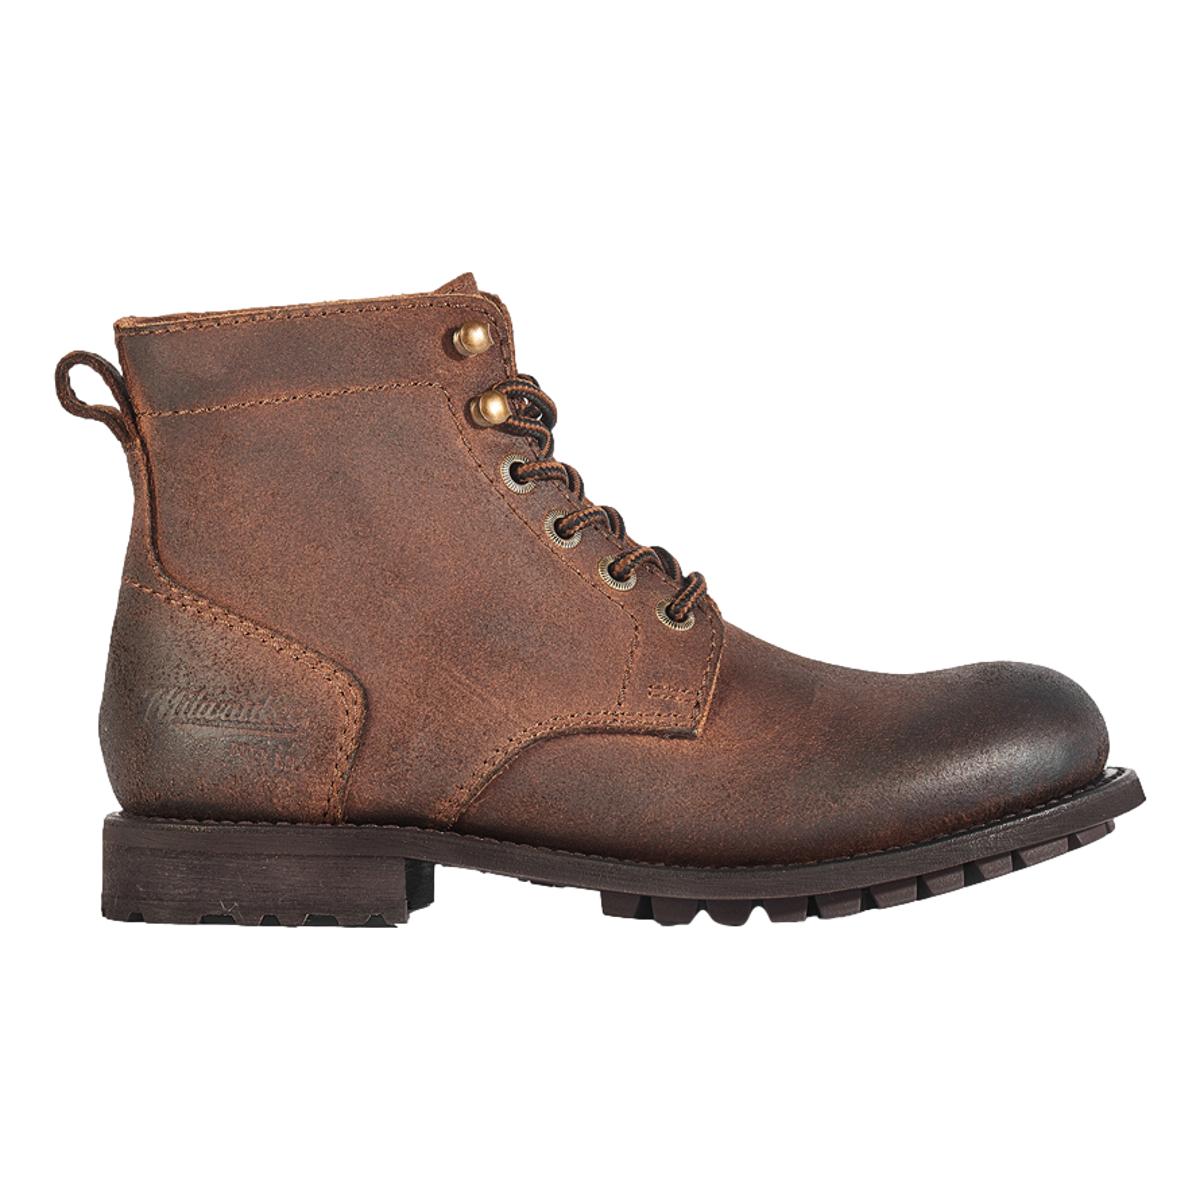 Pfister Plain Toe Lace Up Boot Gaucho - Shoes/Boots